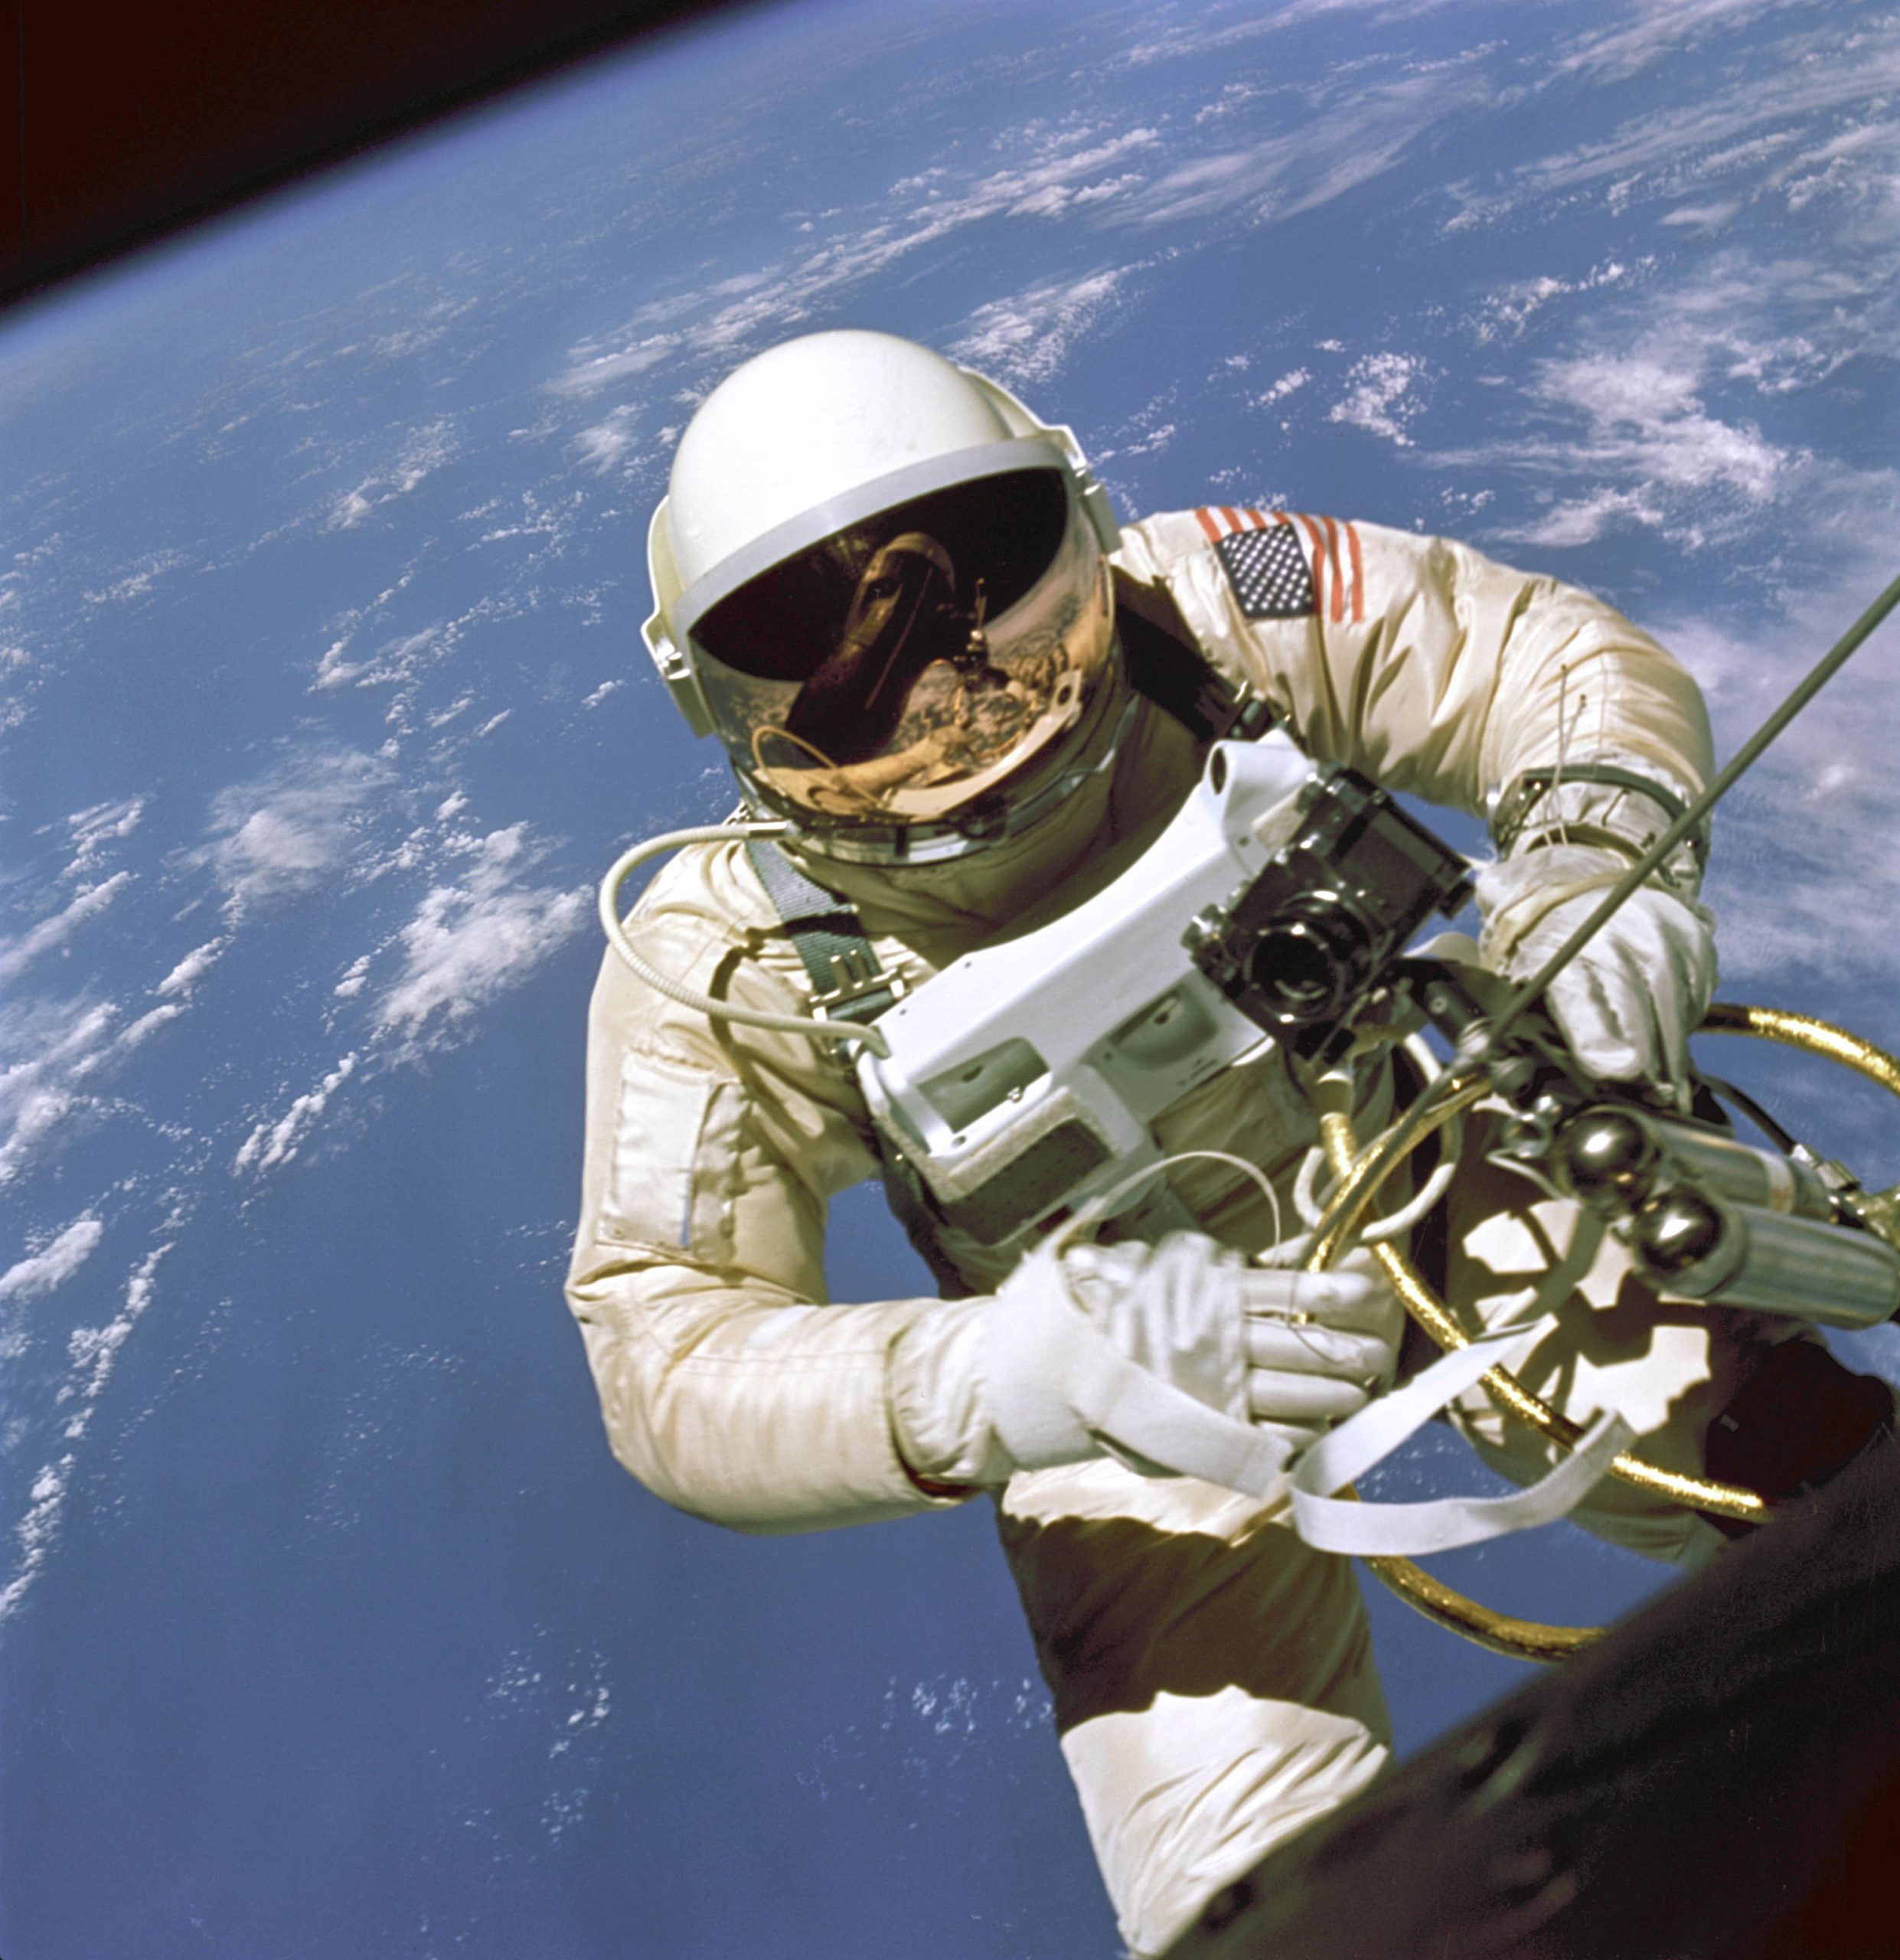 The historic first photograph of man in space: Ed White spacewalking over Hawaii during the first American EVA